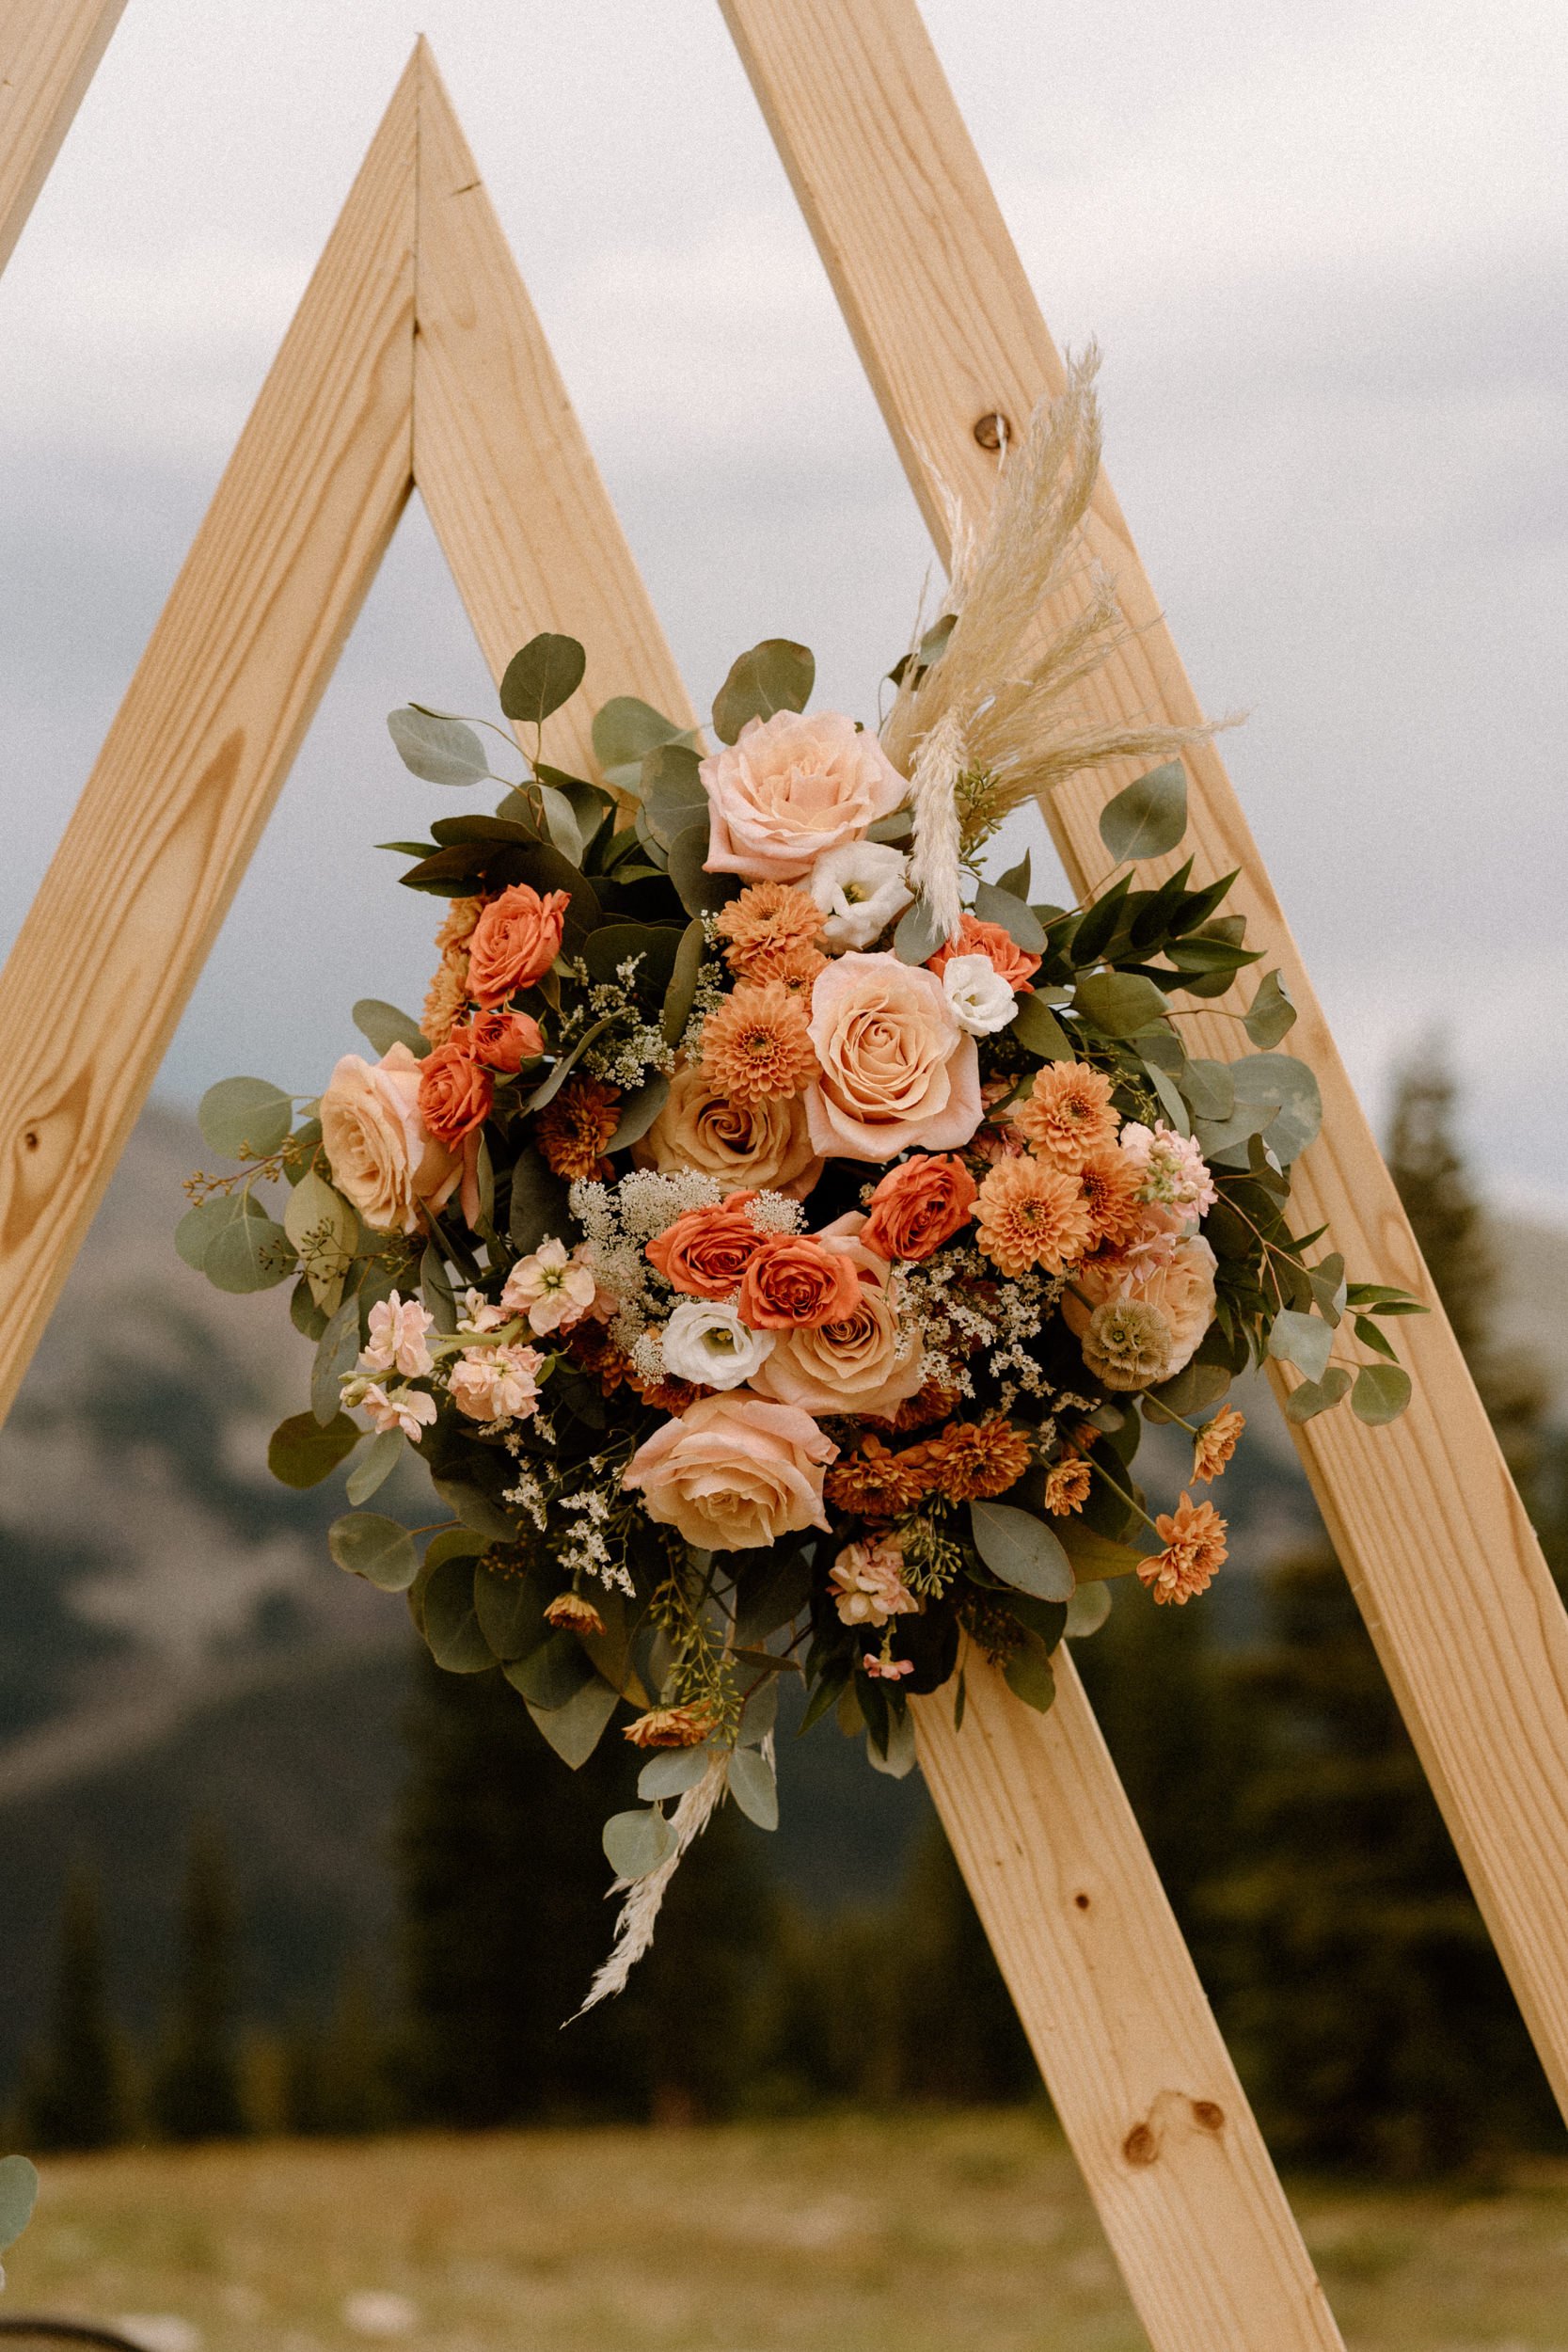 Pink and orange flower bouquet on the wooden triangle altar